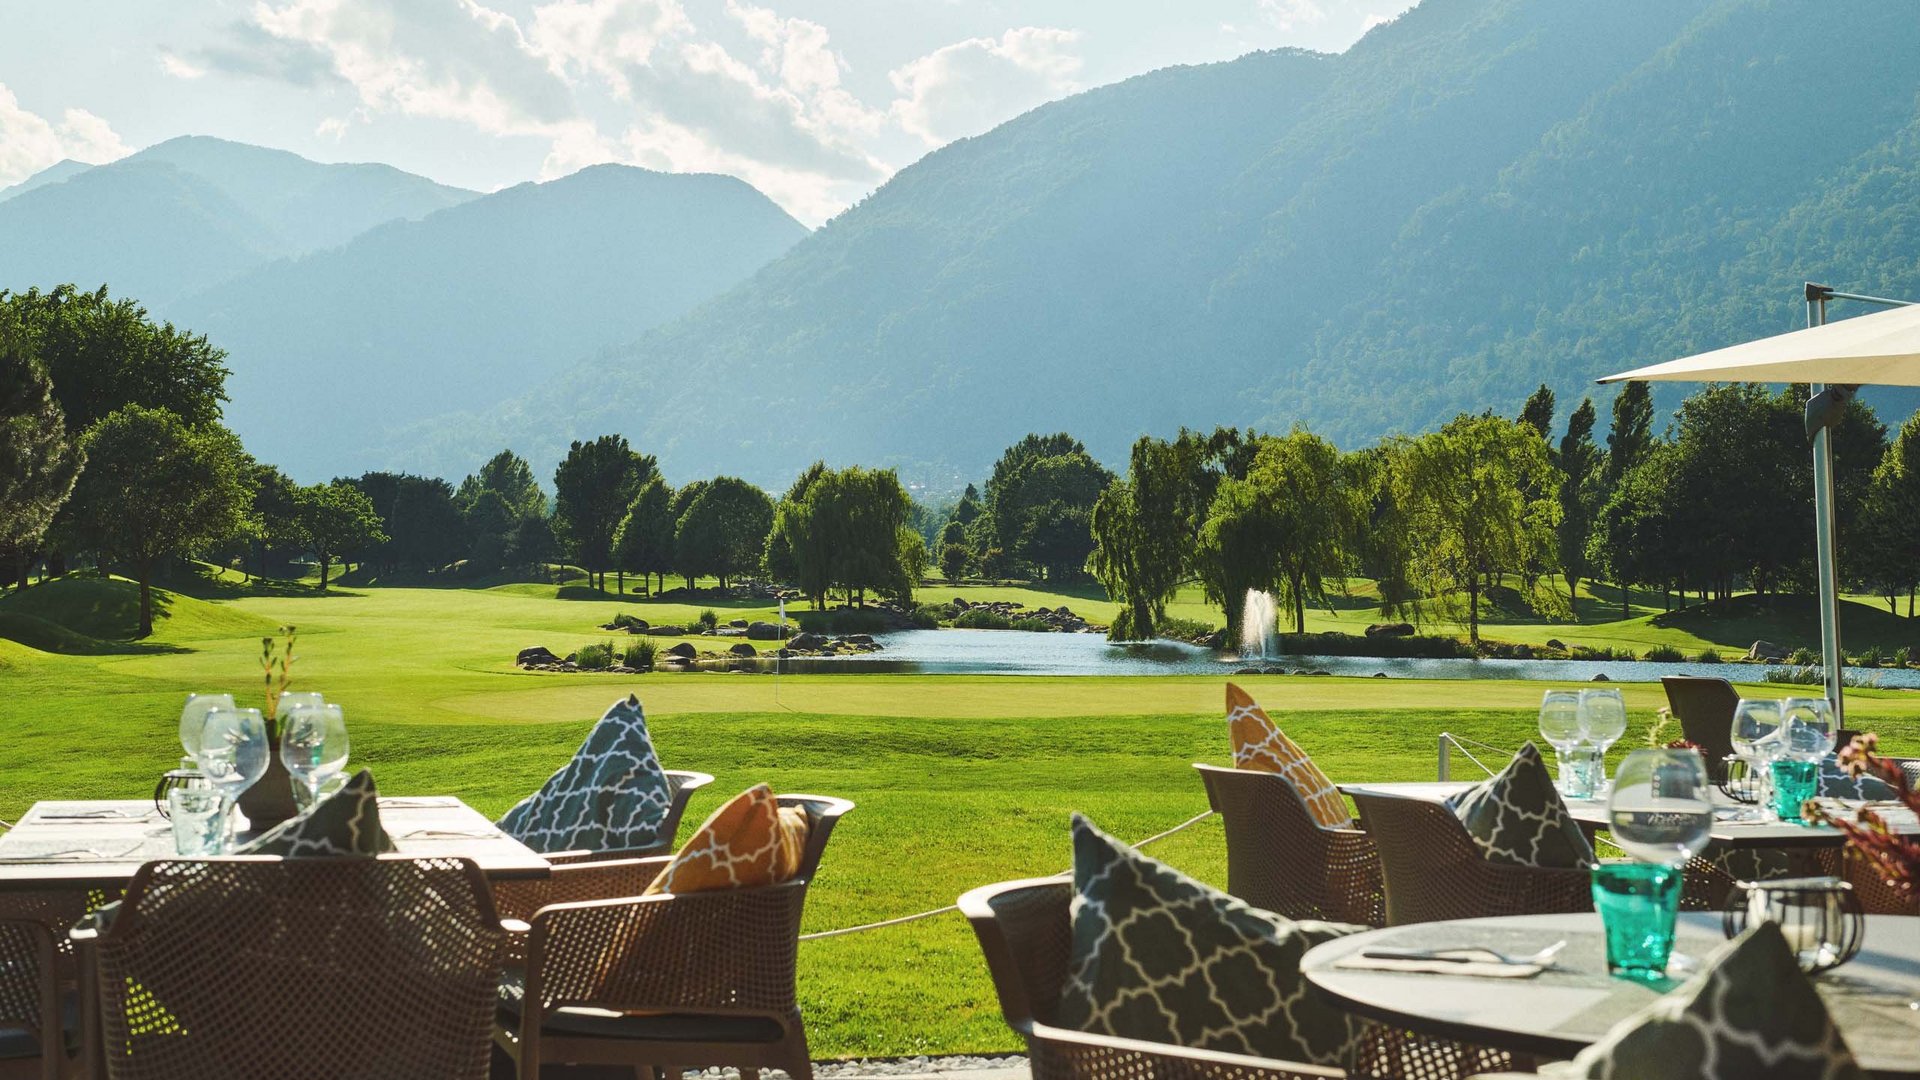 A must-visit during your golf holiday at Lake Maggiore